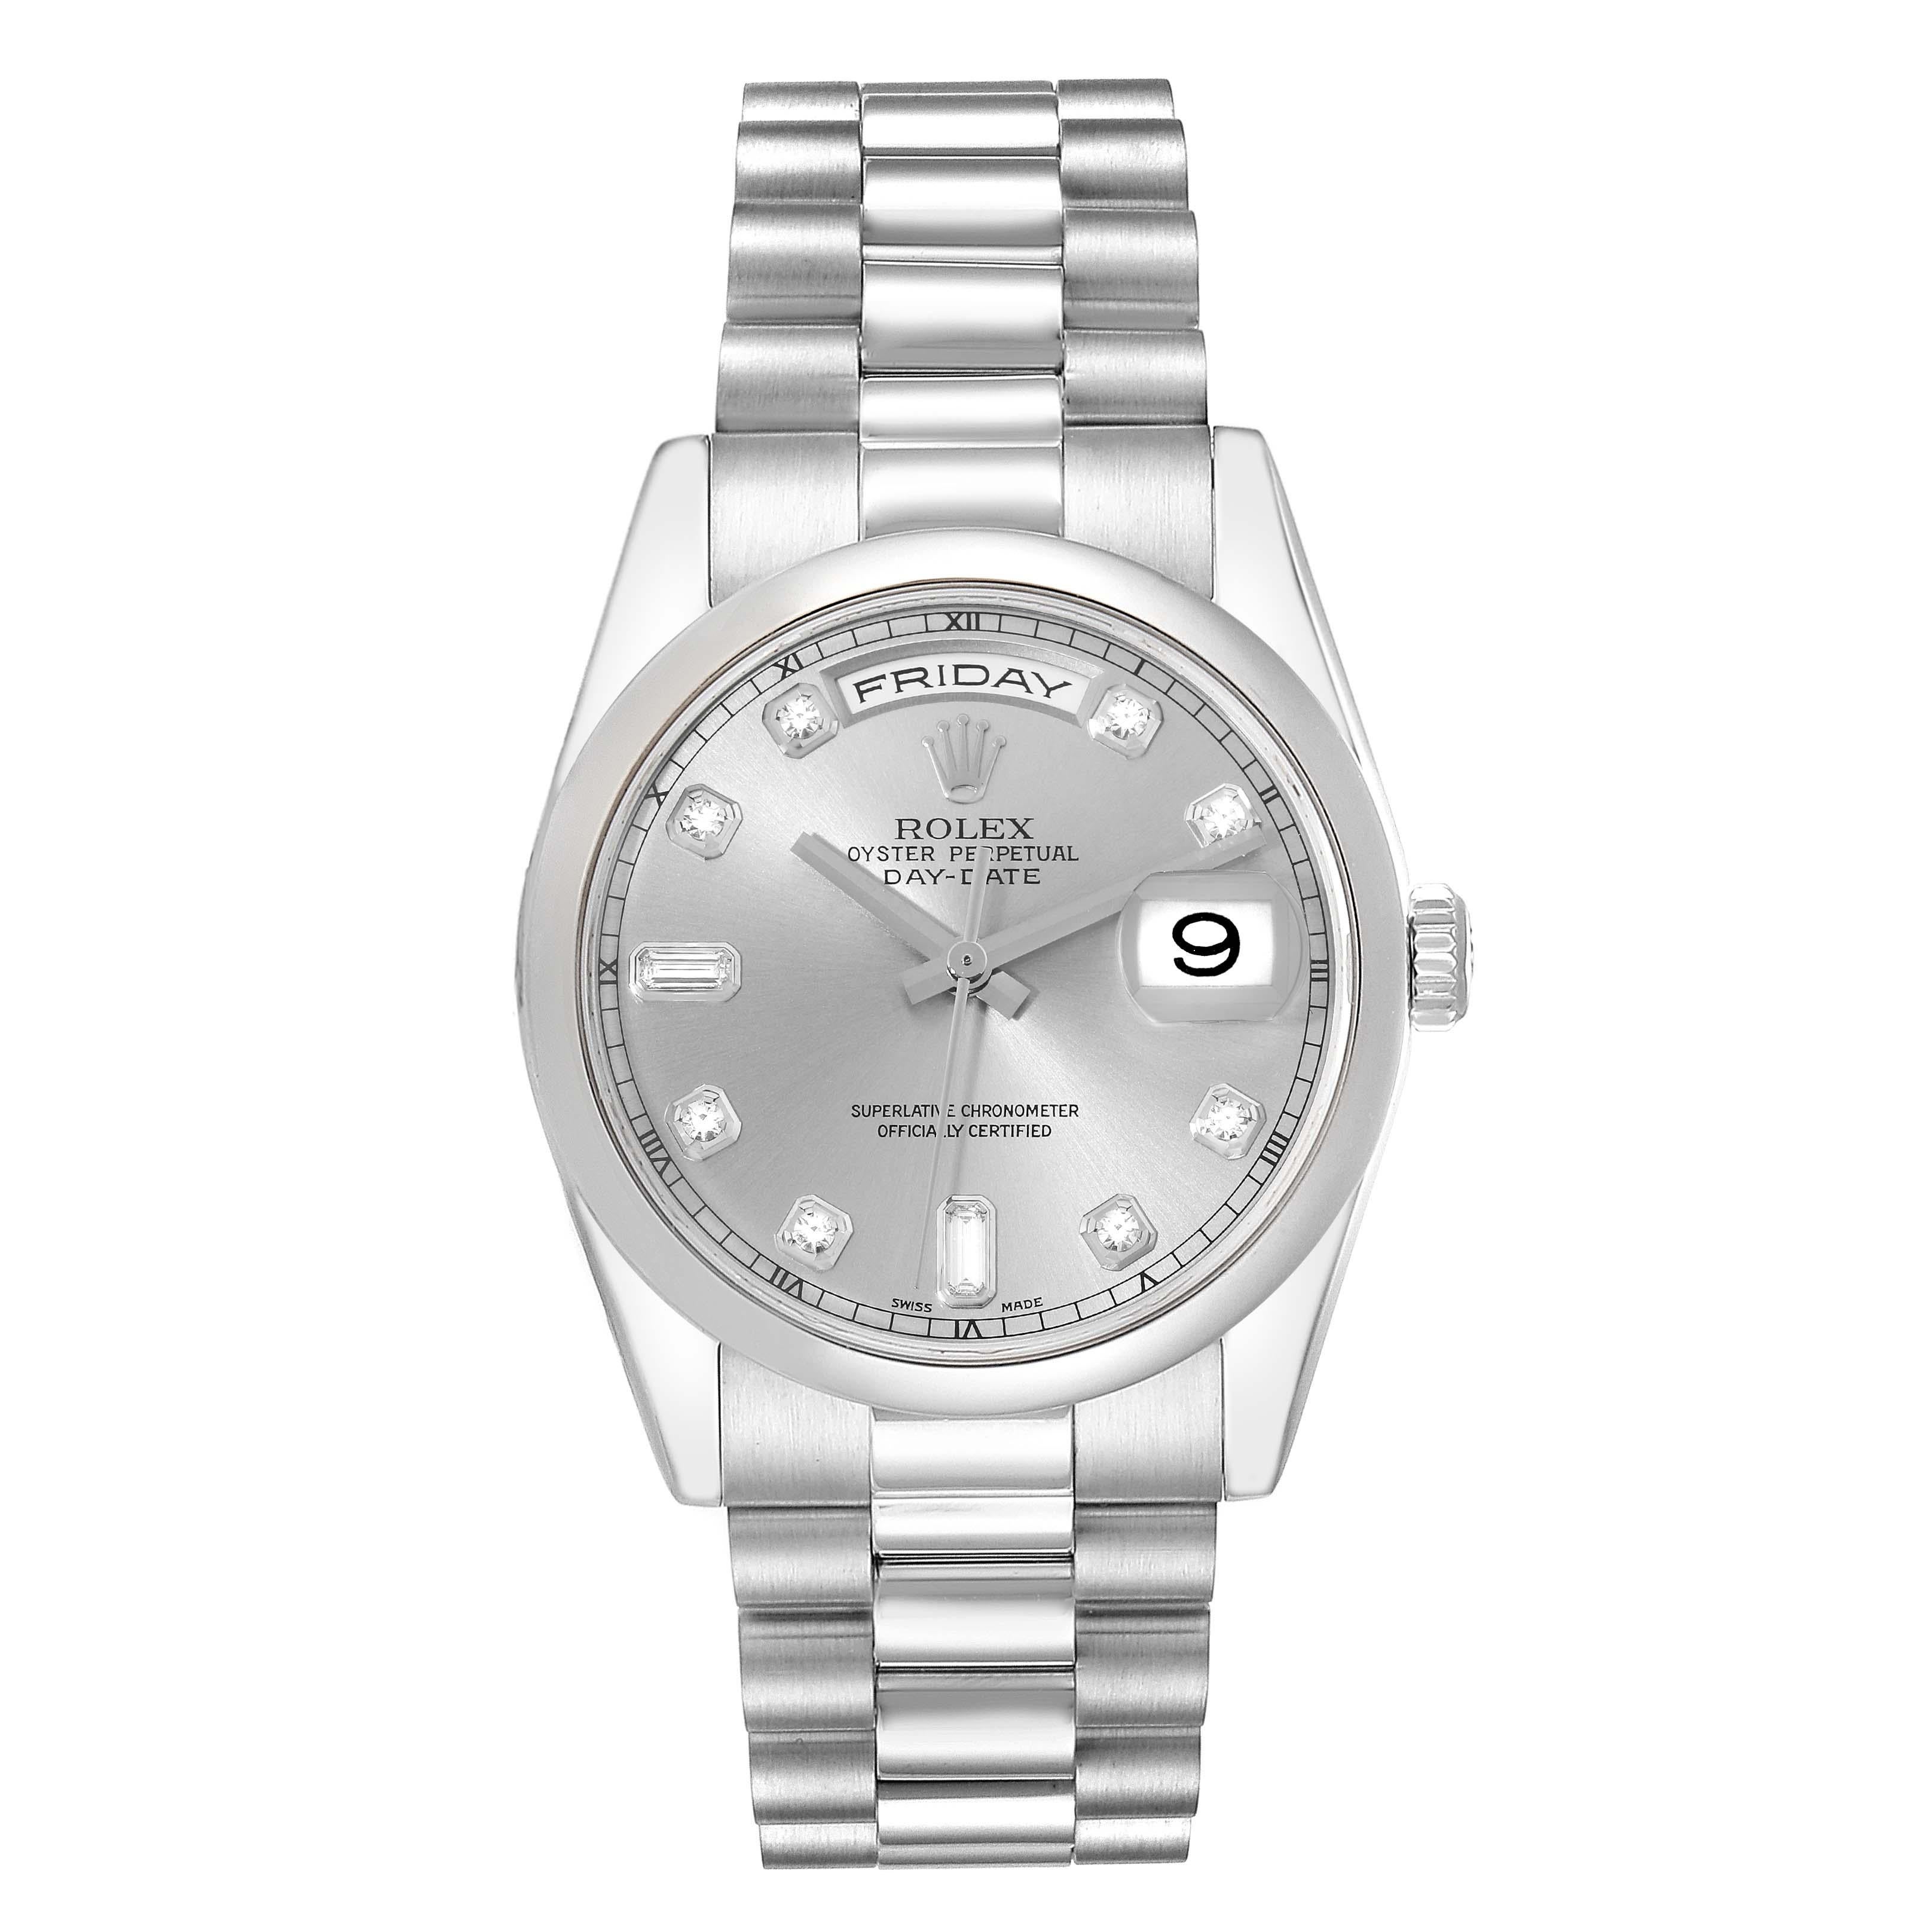 Rolex Day-Date President Diamond Dial Platinum Mens Watch 118206 Box Card. Officially certified chronometer automatic self-winding movement with quickset date function. Platinum oyster case 36.0 mm in diameter. Rolex logo on the crown. Platinum